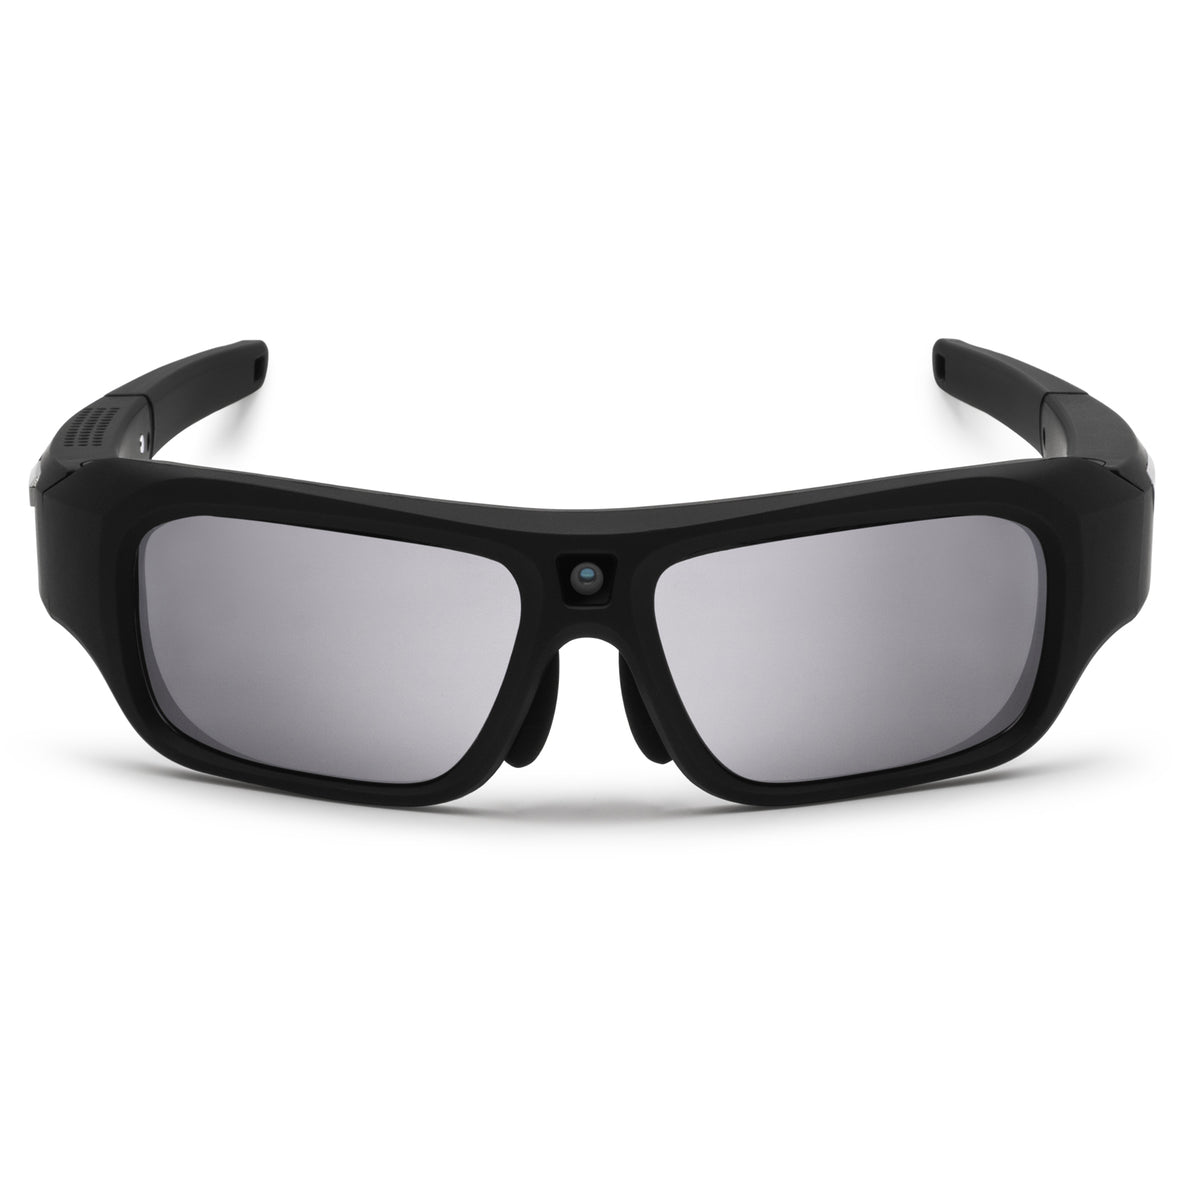 Buy Camera Shooting Sunglasses 600 MAh ABS Battery Mobile WiFi  Interconnection Hiking 1080P HD Camera Glasses Online at Low Prices in  India 